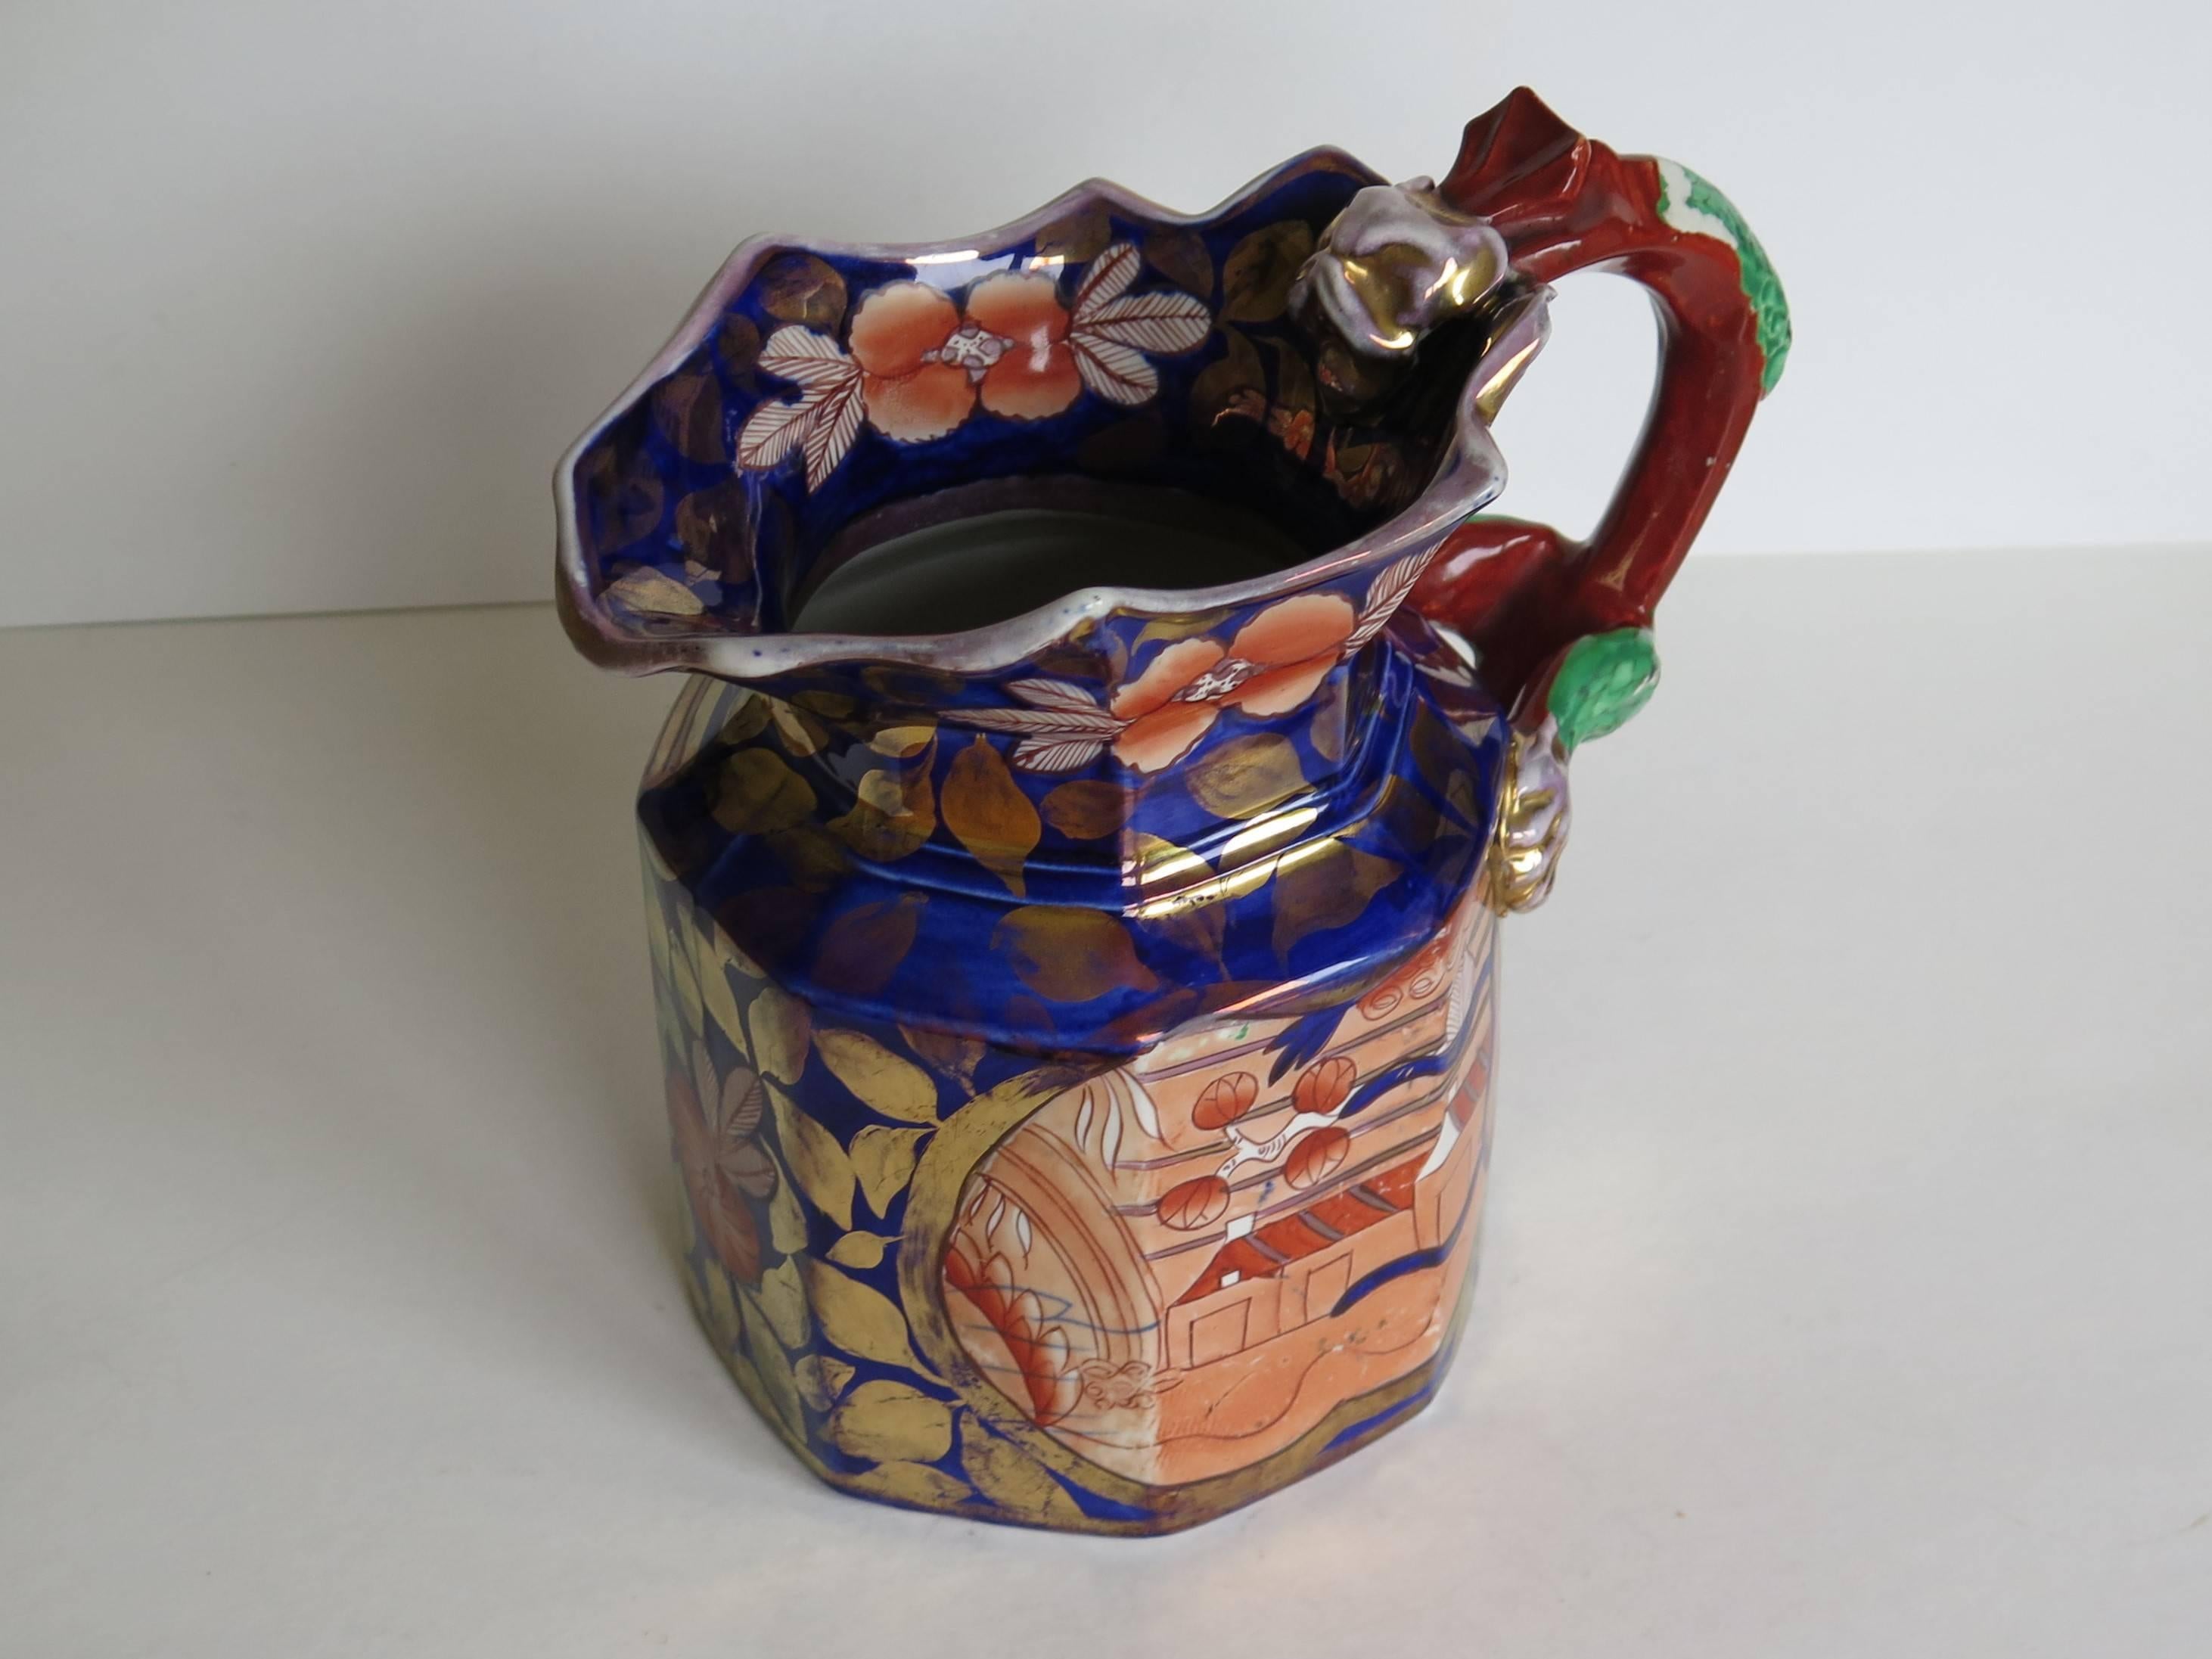 Chinoiserie Early Mason's Ironstone Large Jug or Pitcher School House Pattern, circa 1820